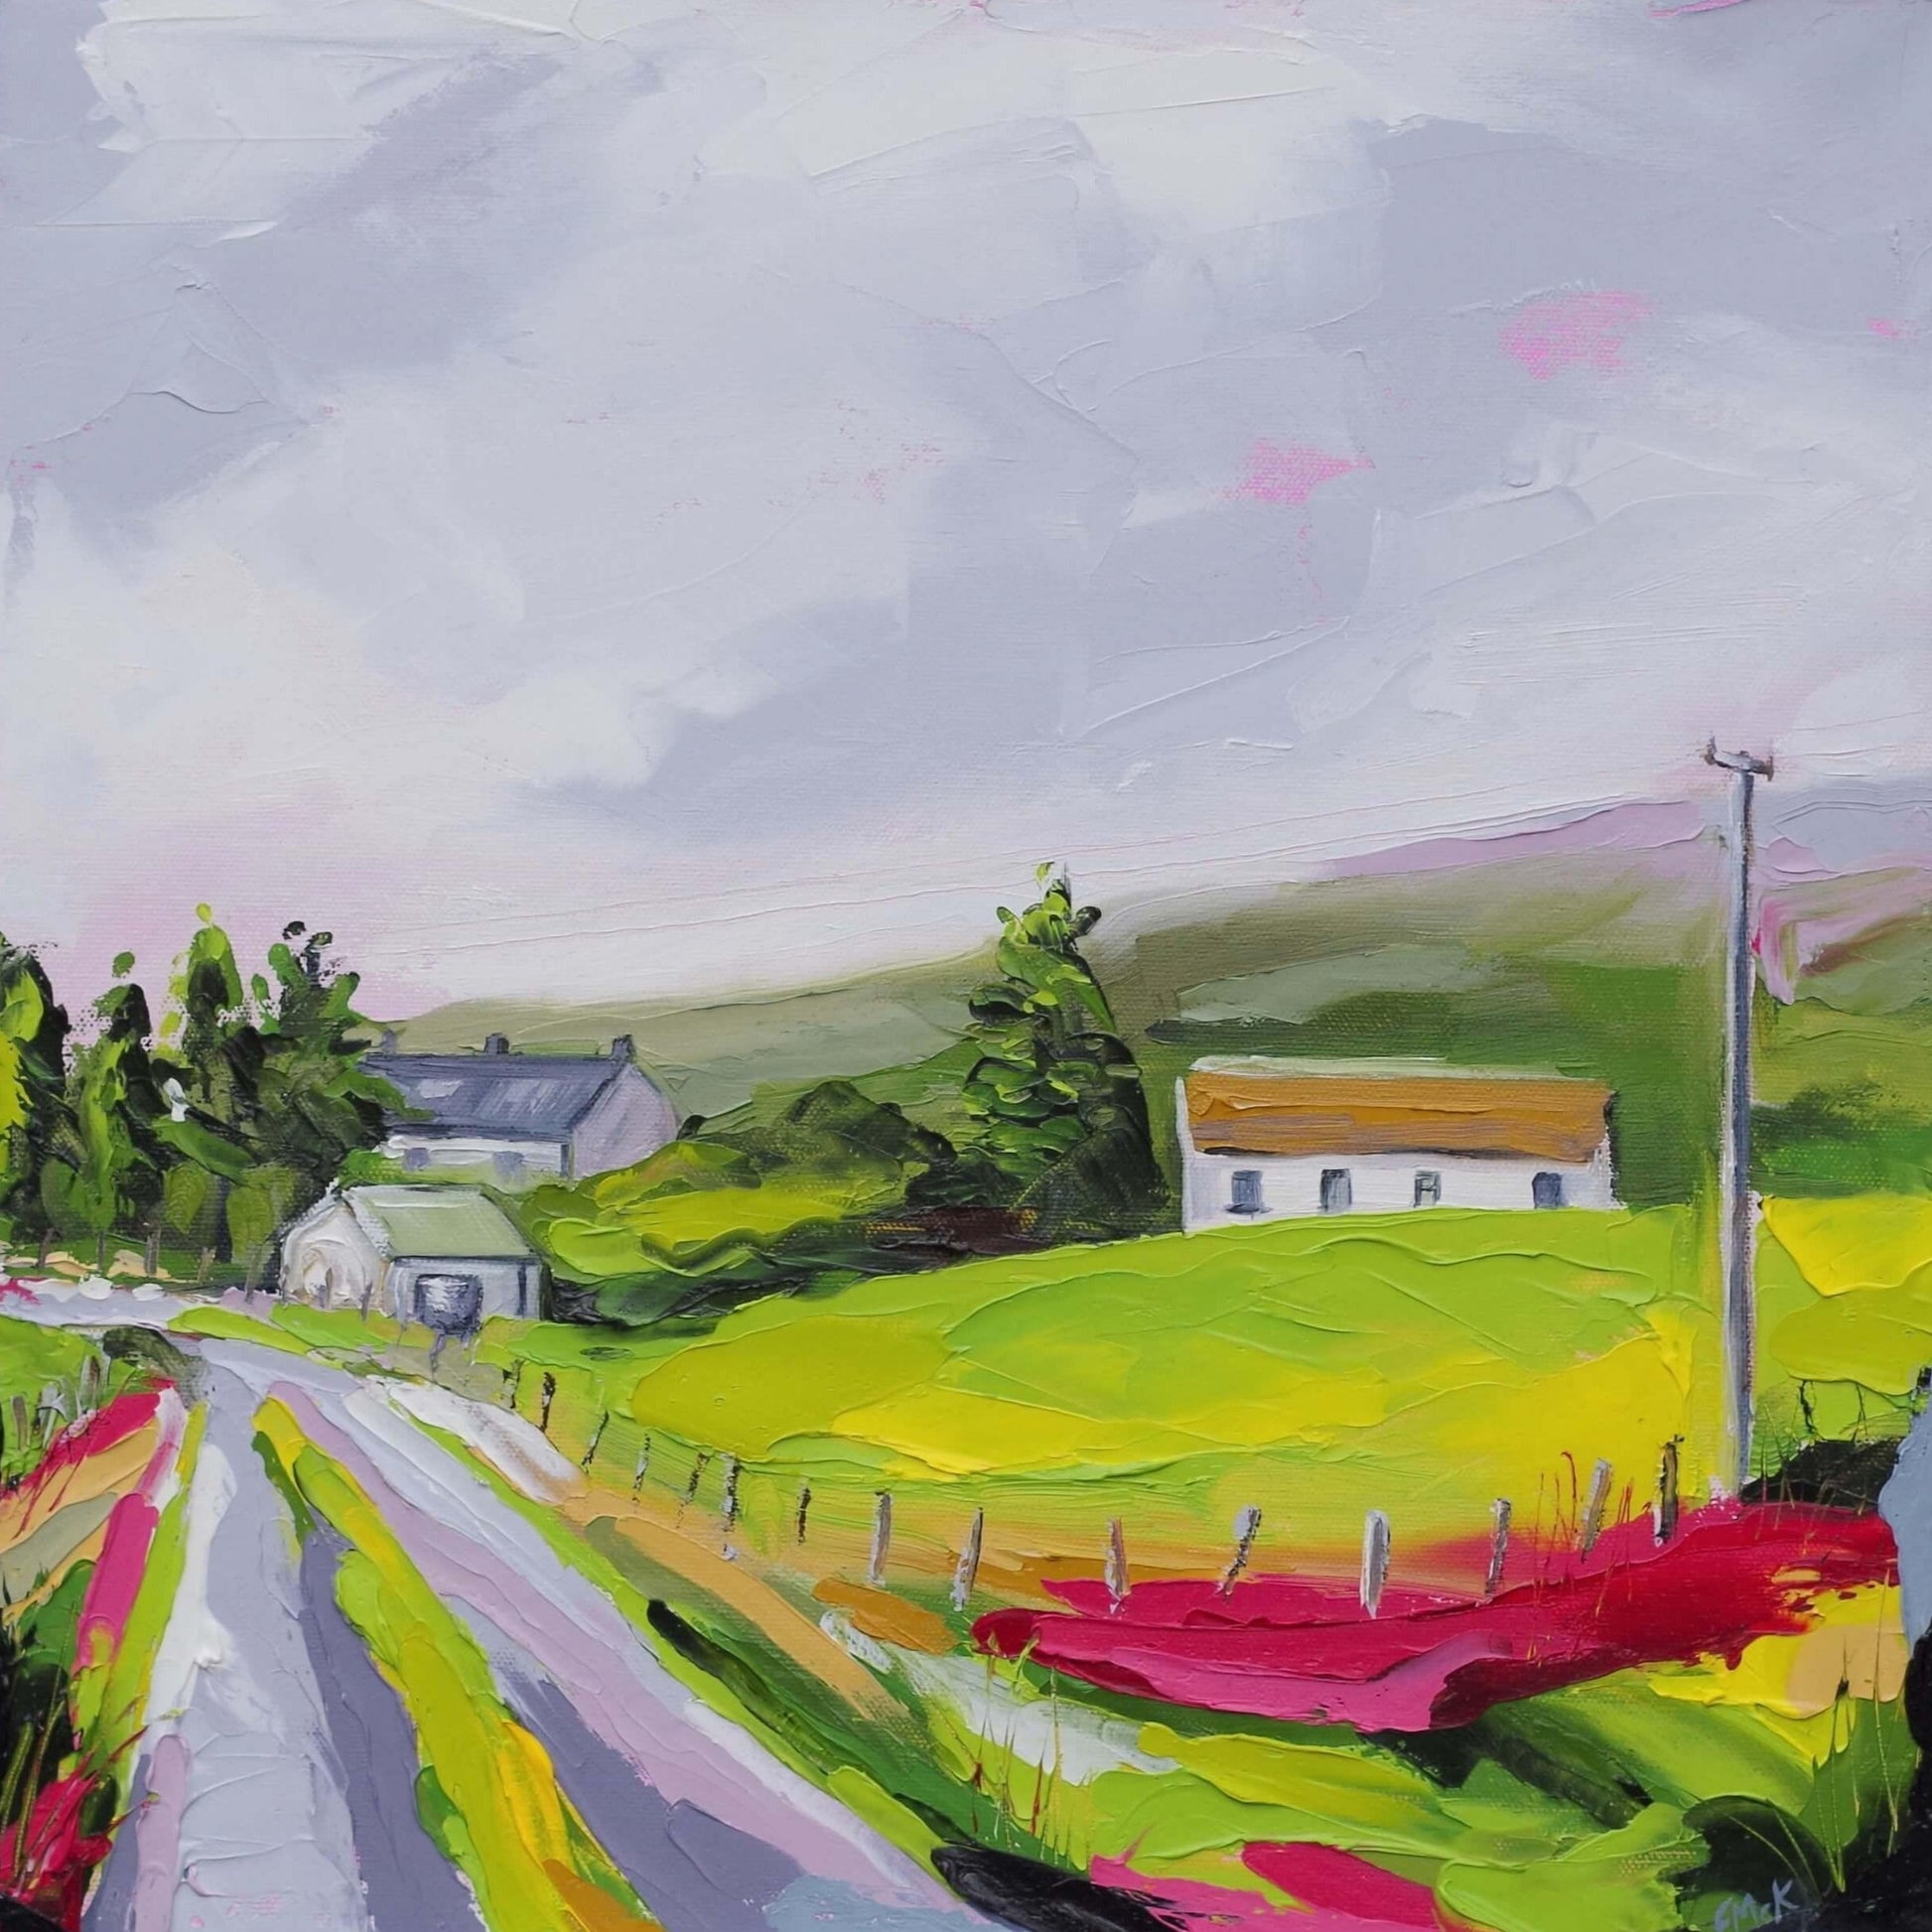 Fiona McKenna Irish Art. An original oil painting inspired by the haunting beauty of the Donegal countryside, Ireland. I always feel like I have been transported back in time when I visit Donegal - the bright colours celebrating memories made here.  16" x 16" (40cm x 40cm) on a deep edge canvas, unframed.